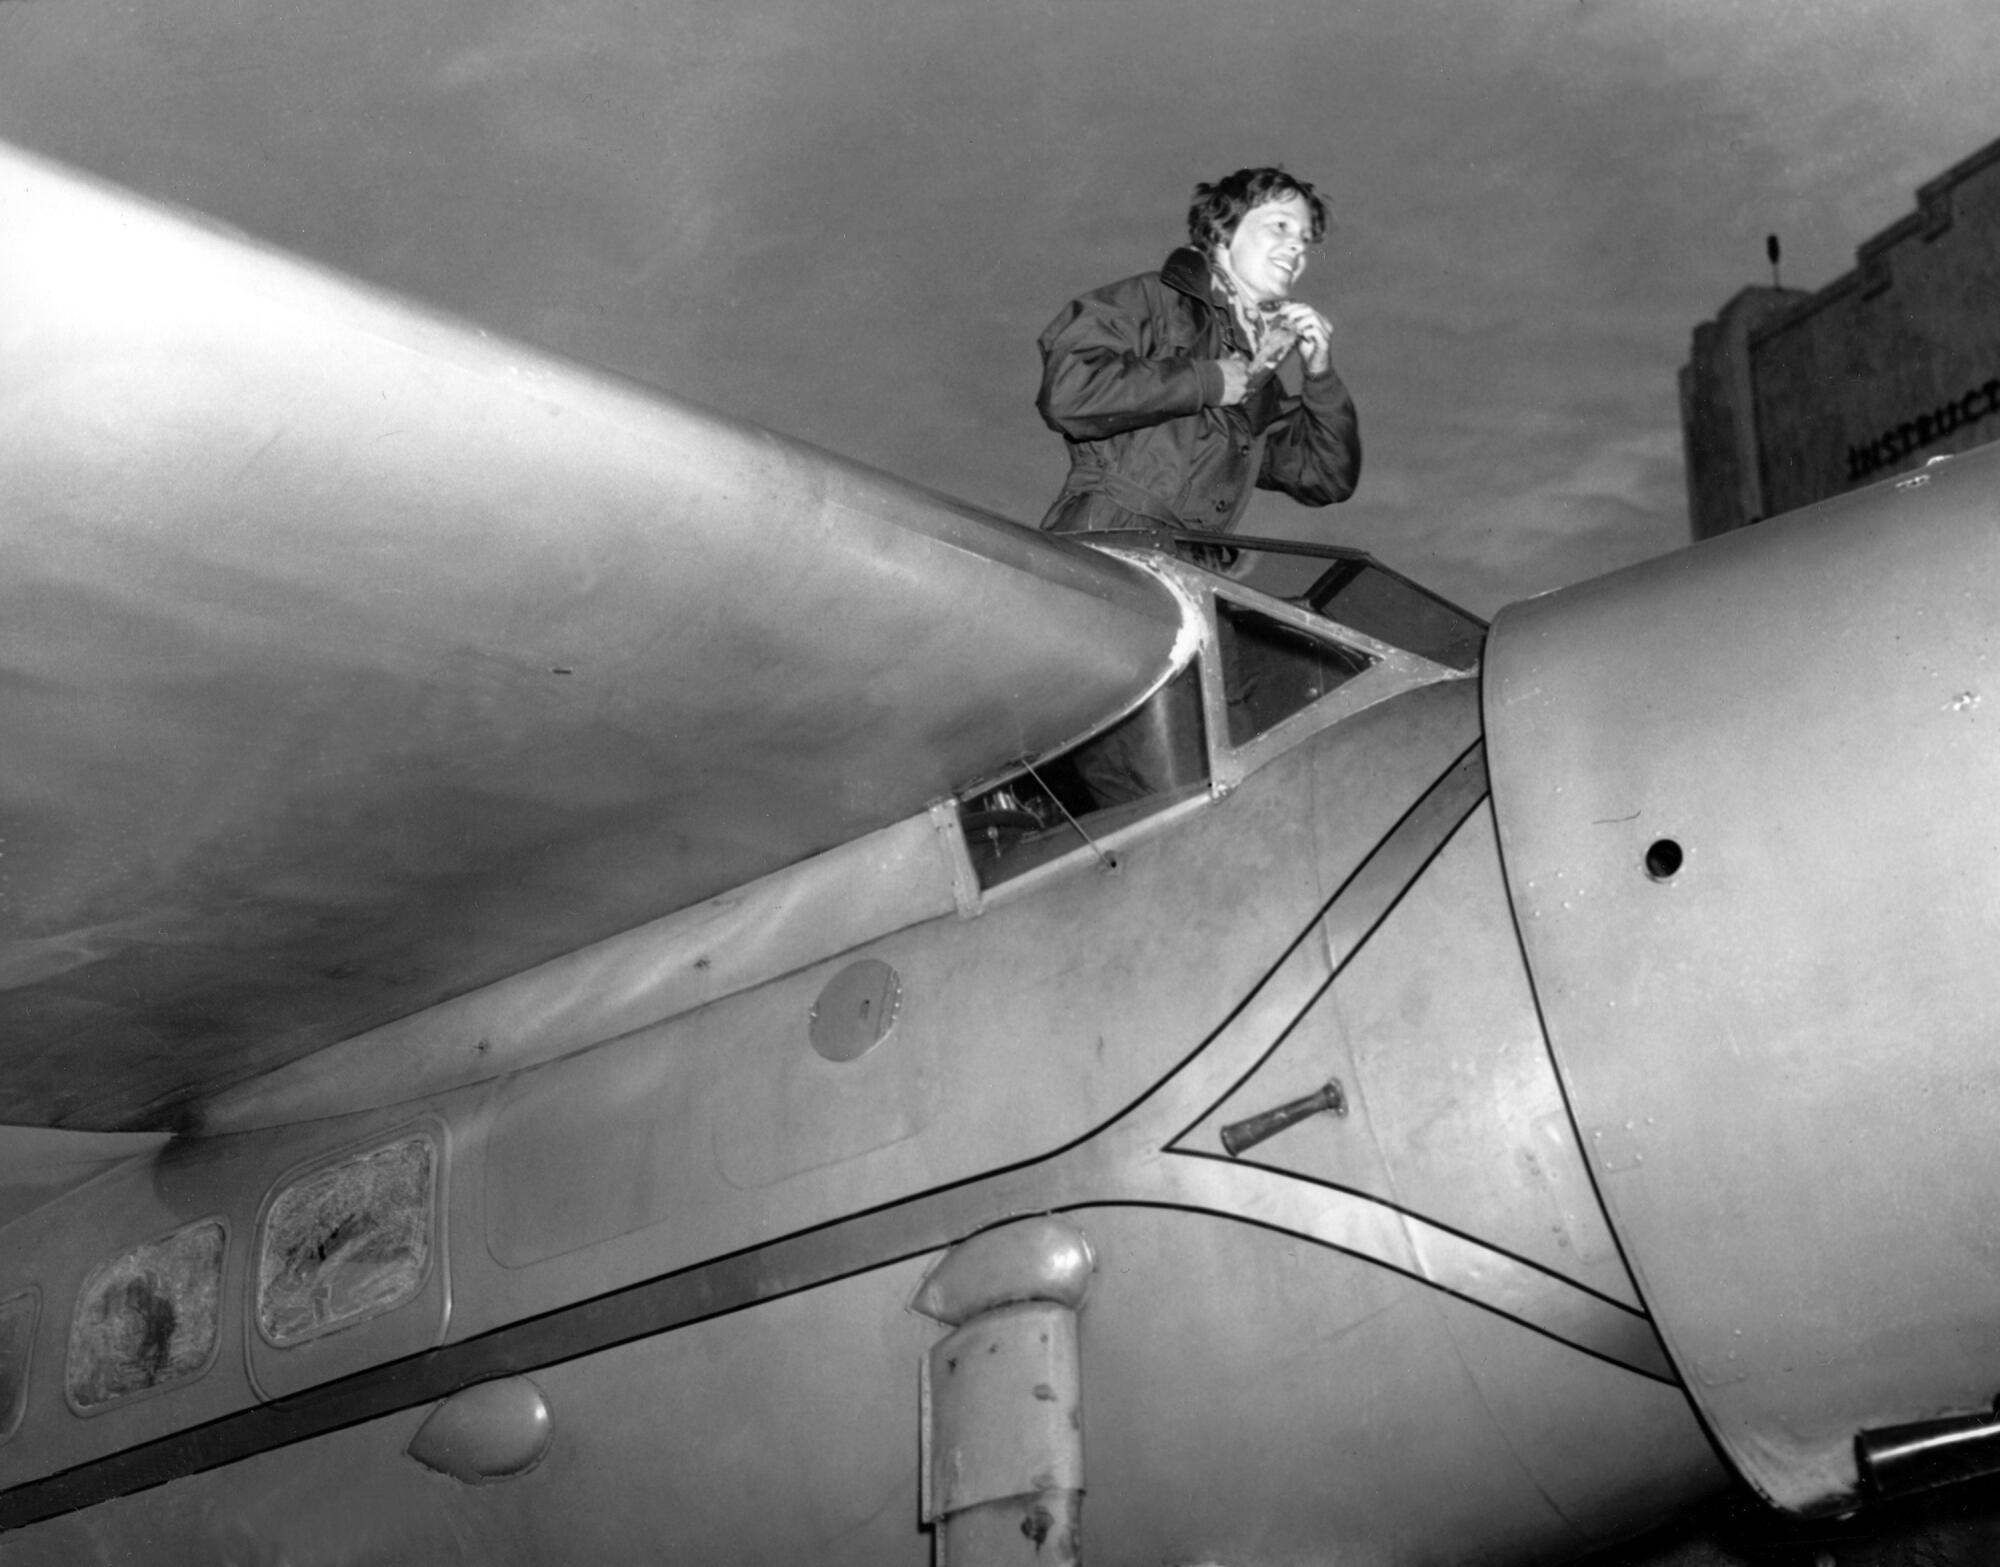 Amelia Earhart climbs from the cockpit of a plane